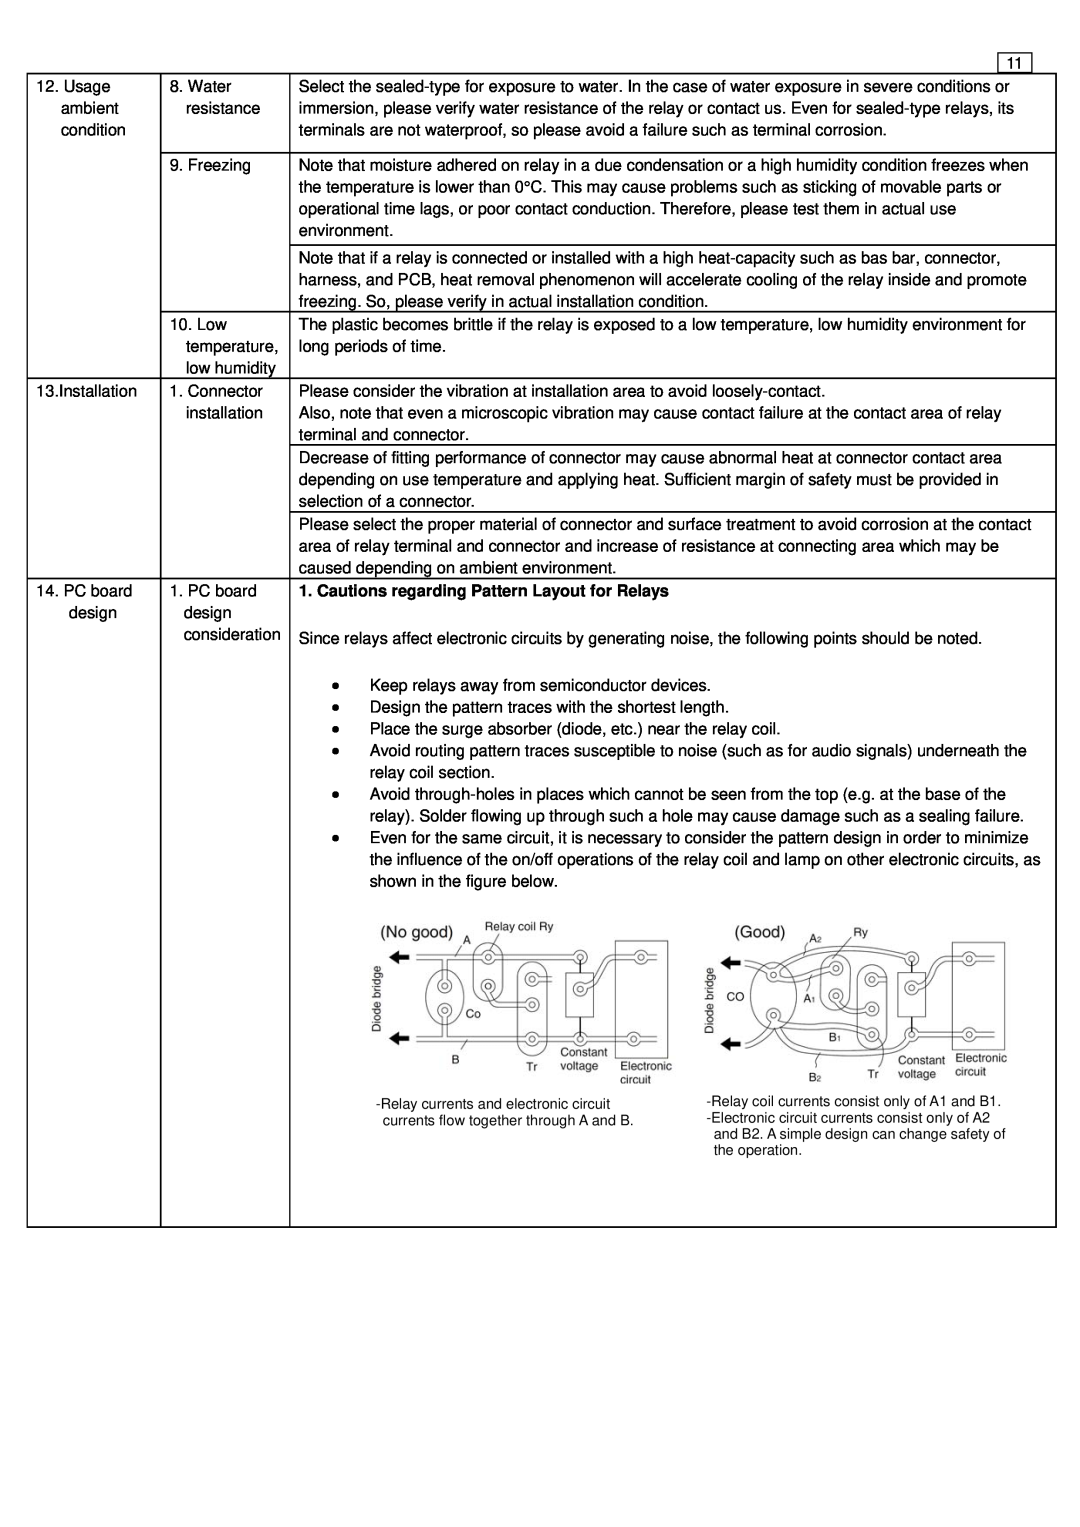 Panasonic ASCT1F46E Cautions regarding Pattern Layout for Relays, consideration, Relay currents and electronic circuit 